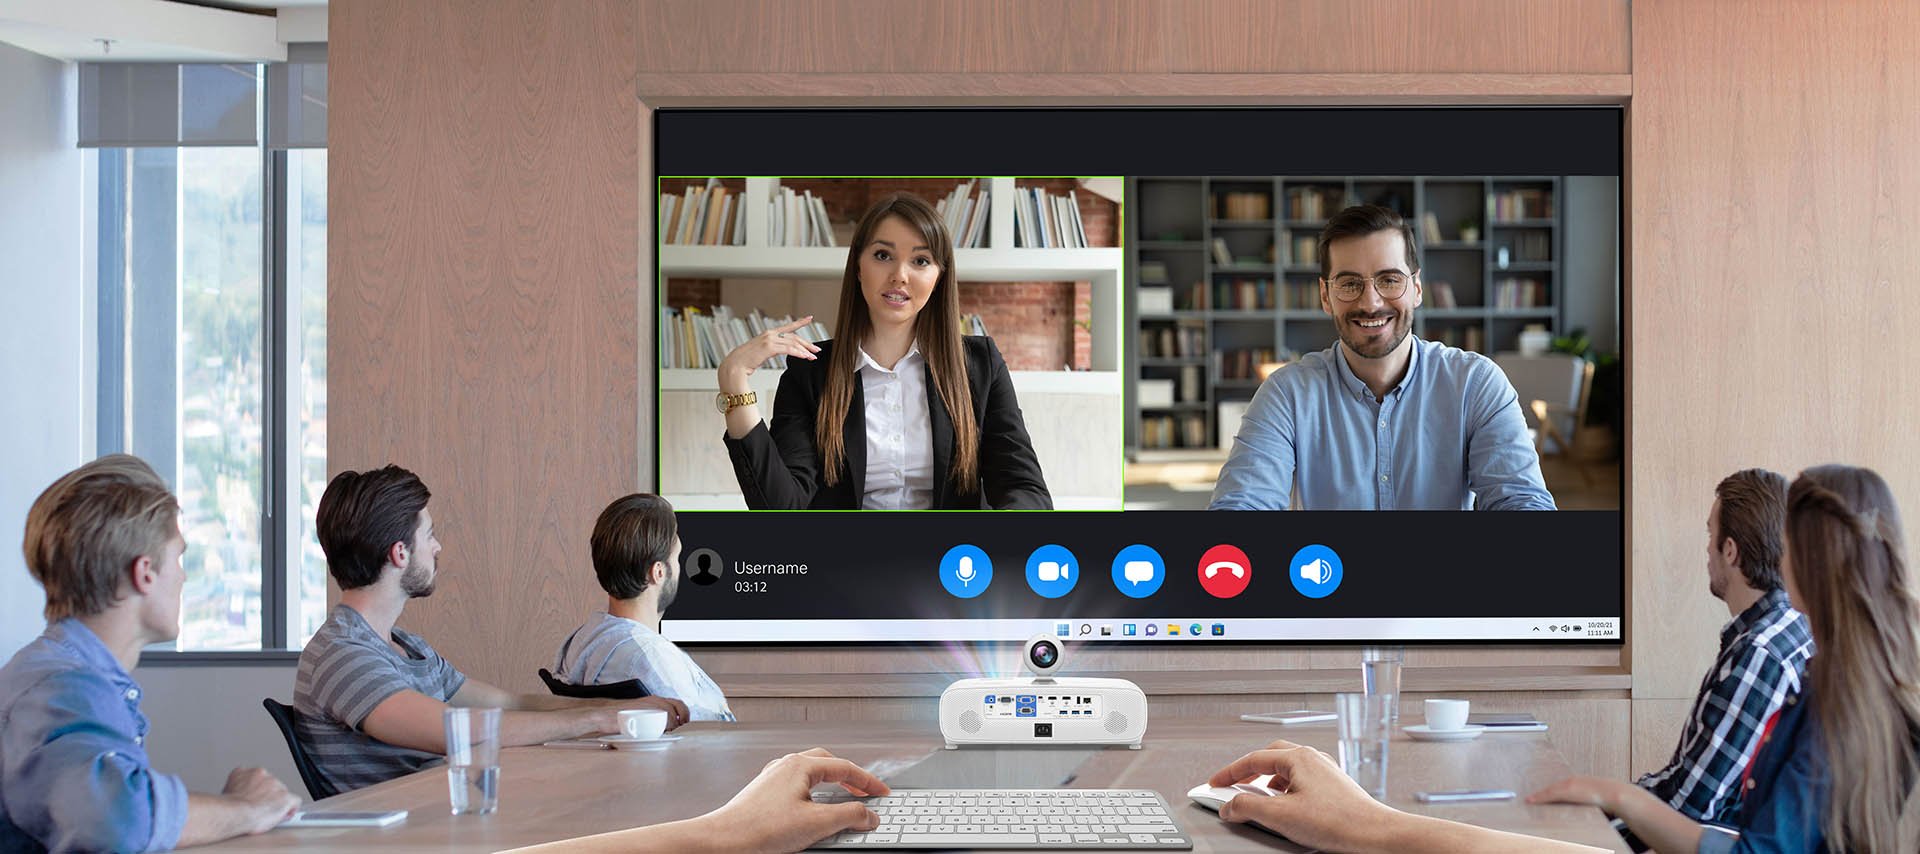 Cloud workers can streamline meetings with EH620 windows projector